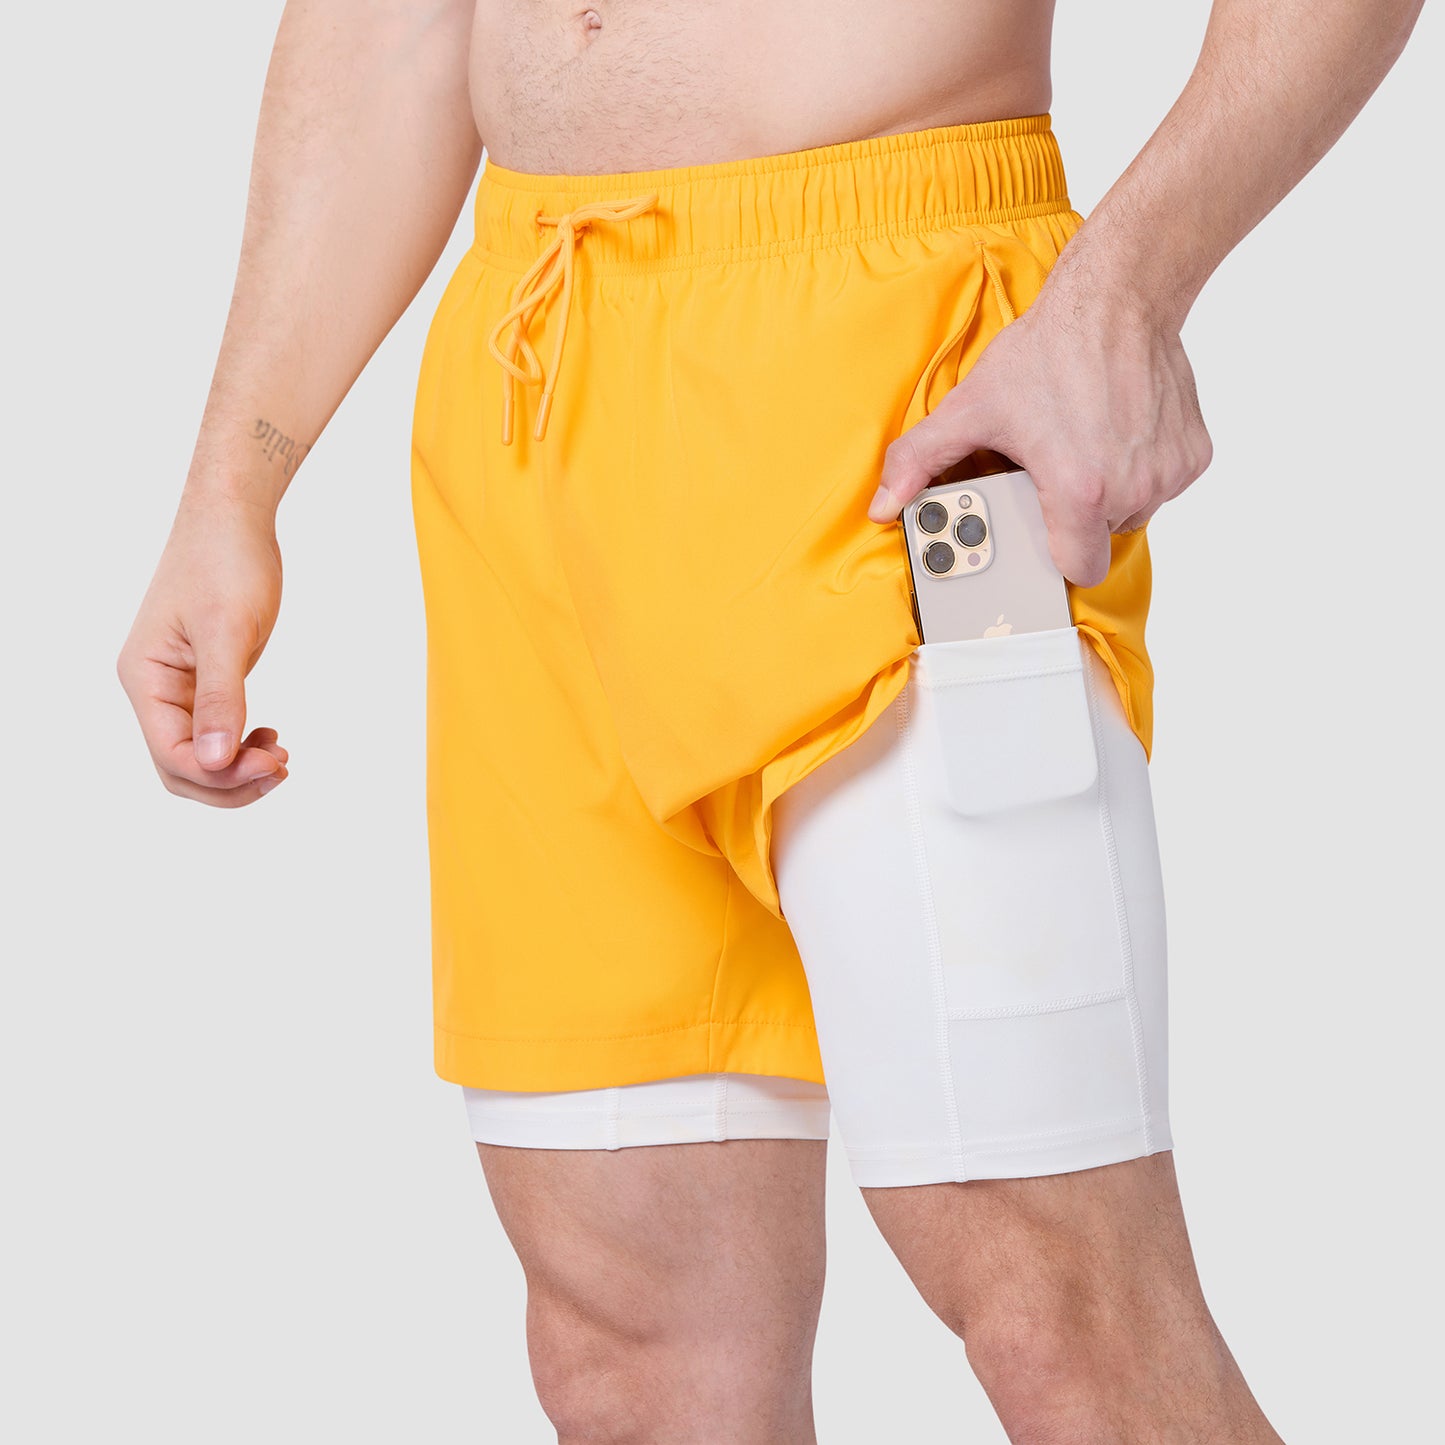 Limitless 2-In-1 7" Shorts - Spectra Yellow